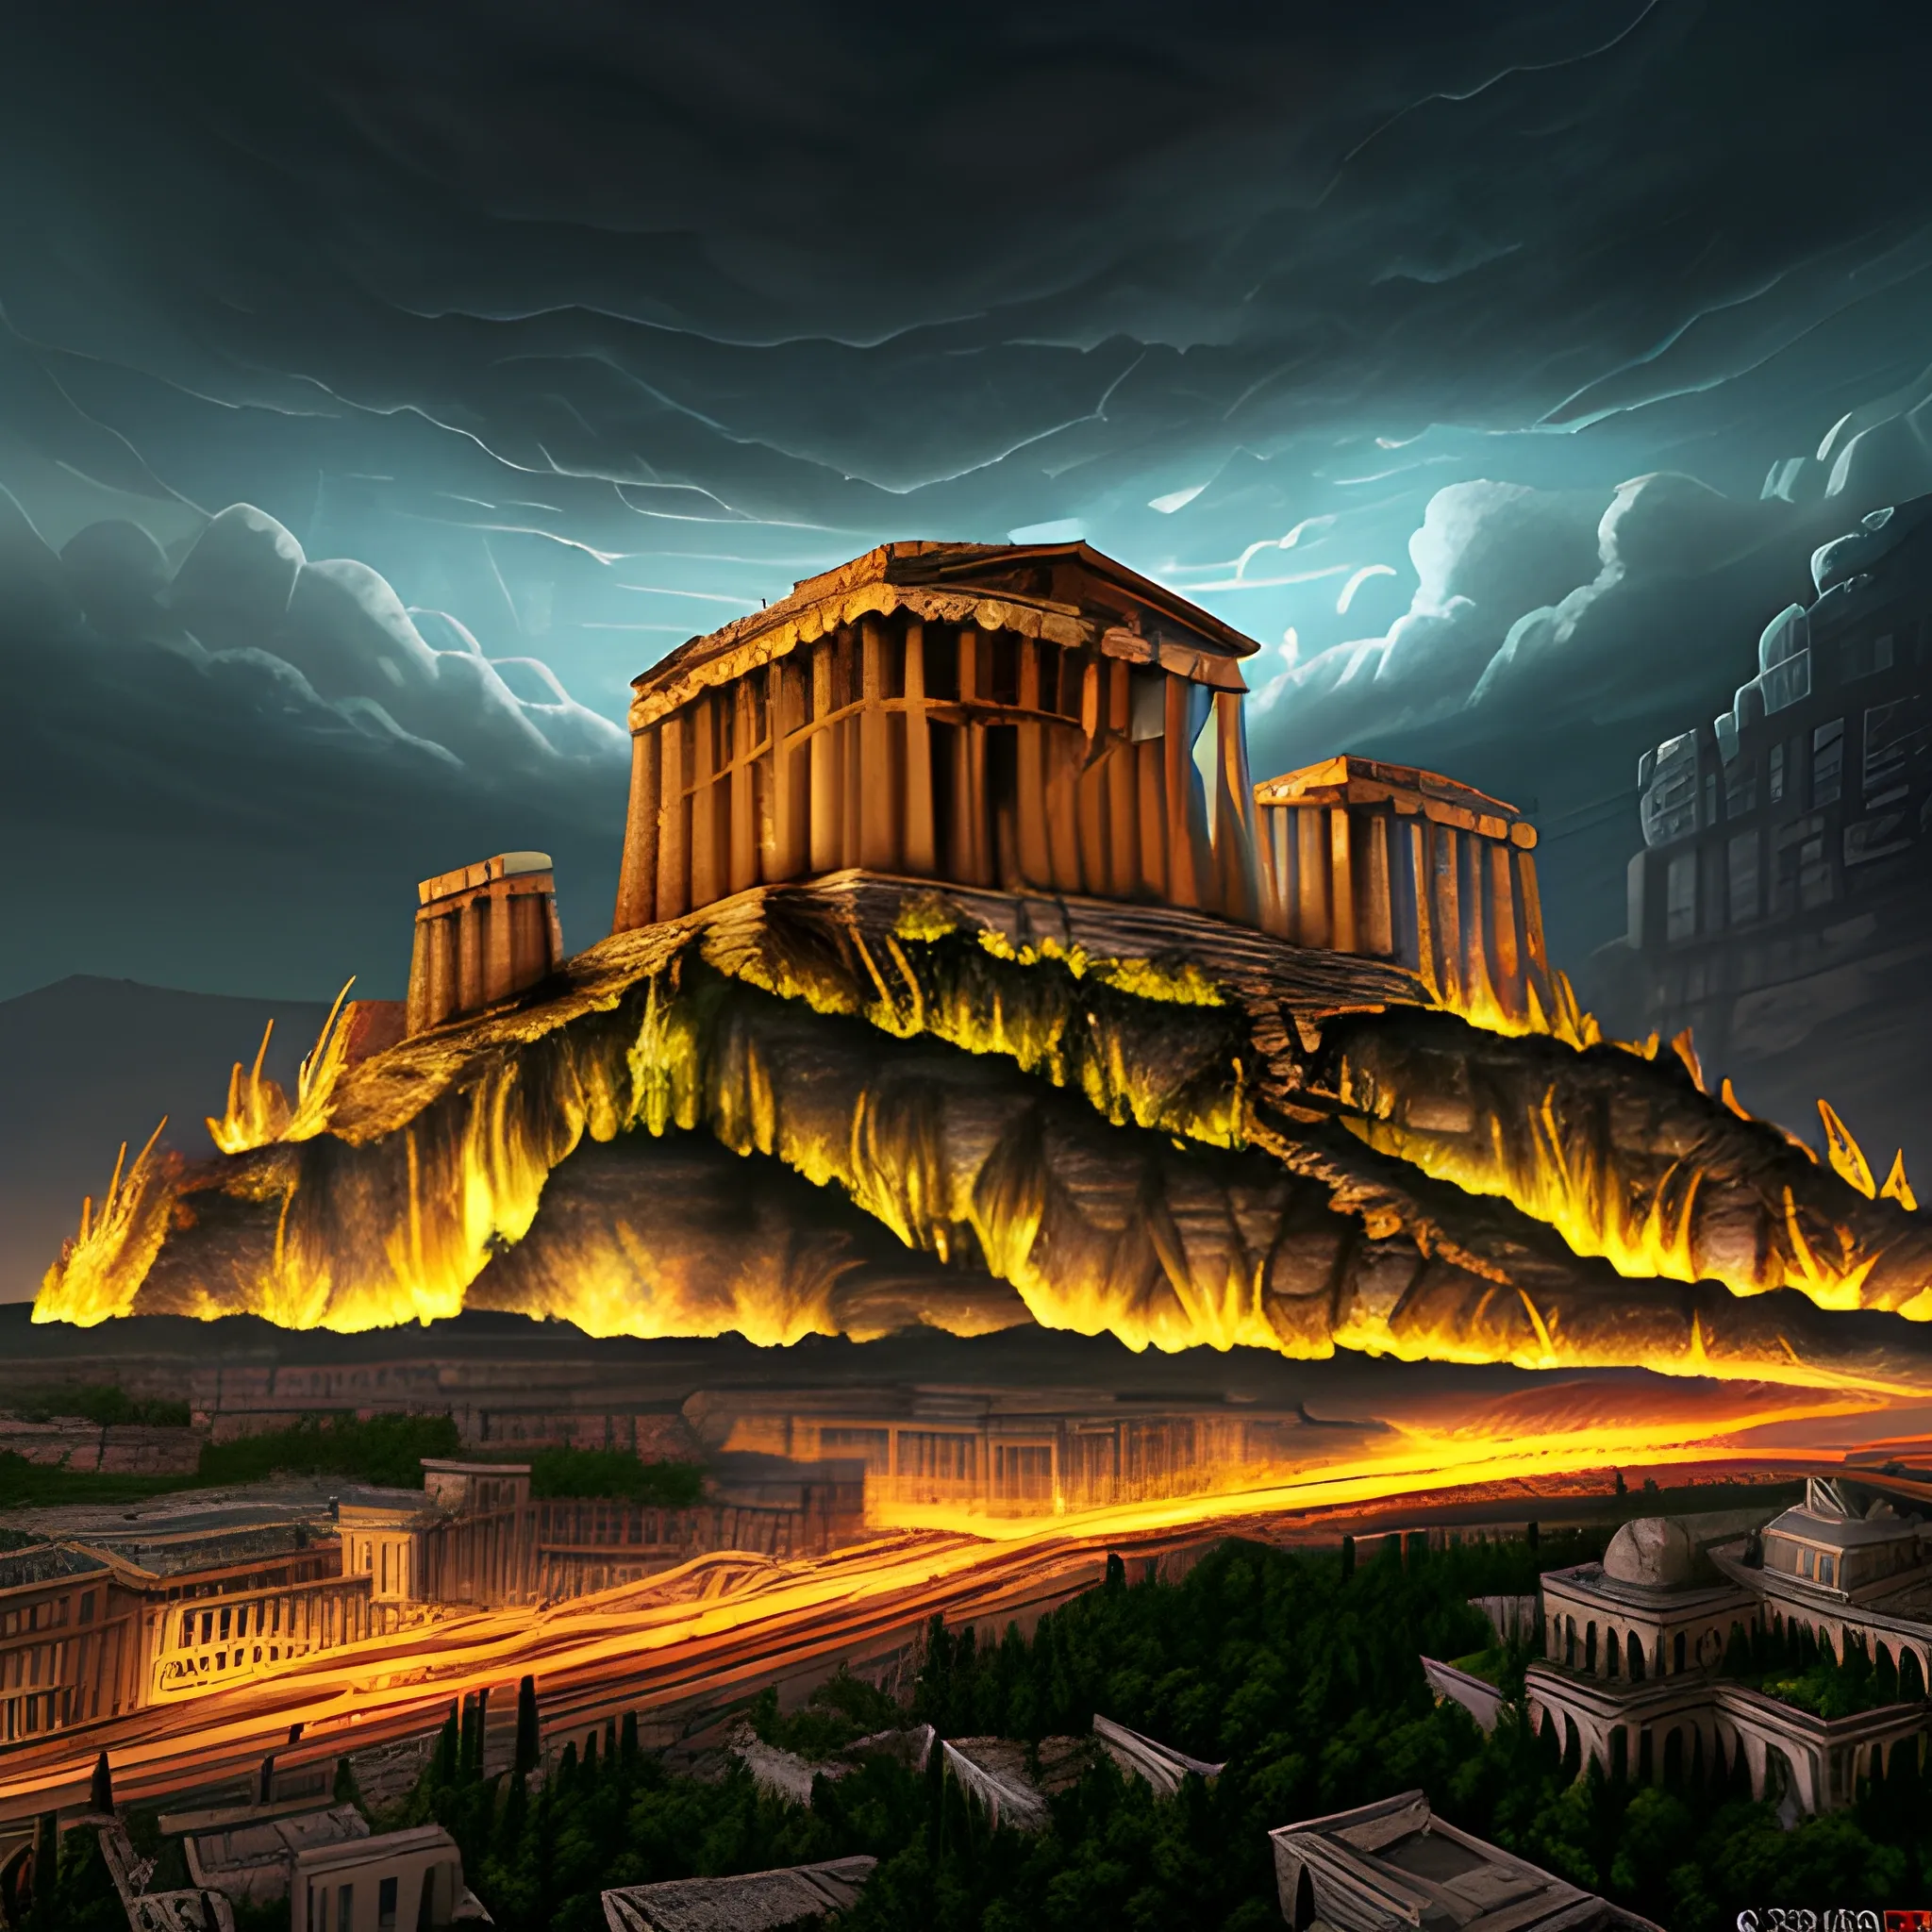 city of acropolis, on a high mountain, destroyed city, surrounded by clouds, dark environment, place of terror, dim lights, destruction, rot, night, darkness, dead vegetation, moor, rotten fauna, dry trees, burned grass, dead grass, barren plants, burned trees, small creatures, 4 legs, stare, green eyes, glowing eyes, dark lighting, terror, dark moon, darkness, ruins, destroyed, death, ancient greek architectural details, detailed environment, hyper realistic, city destroyed, decay, rot, 8k details, wide angle, 3d, panoramic view, slasher style